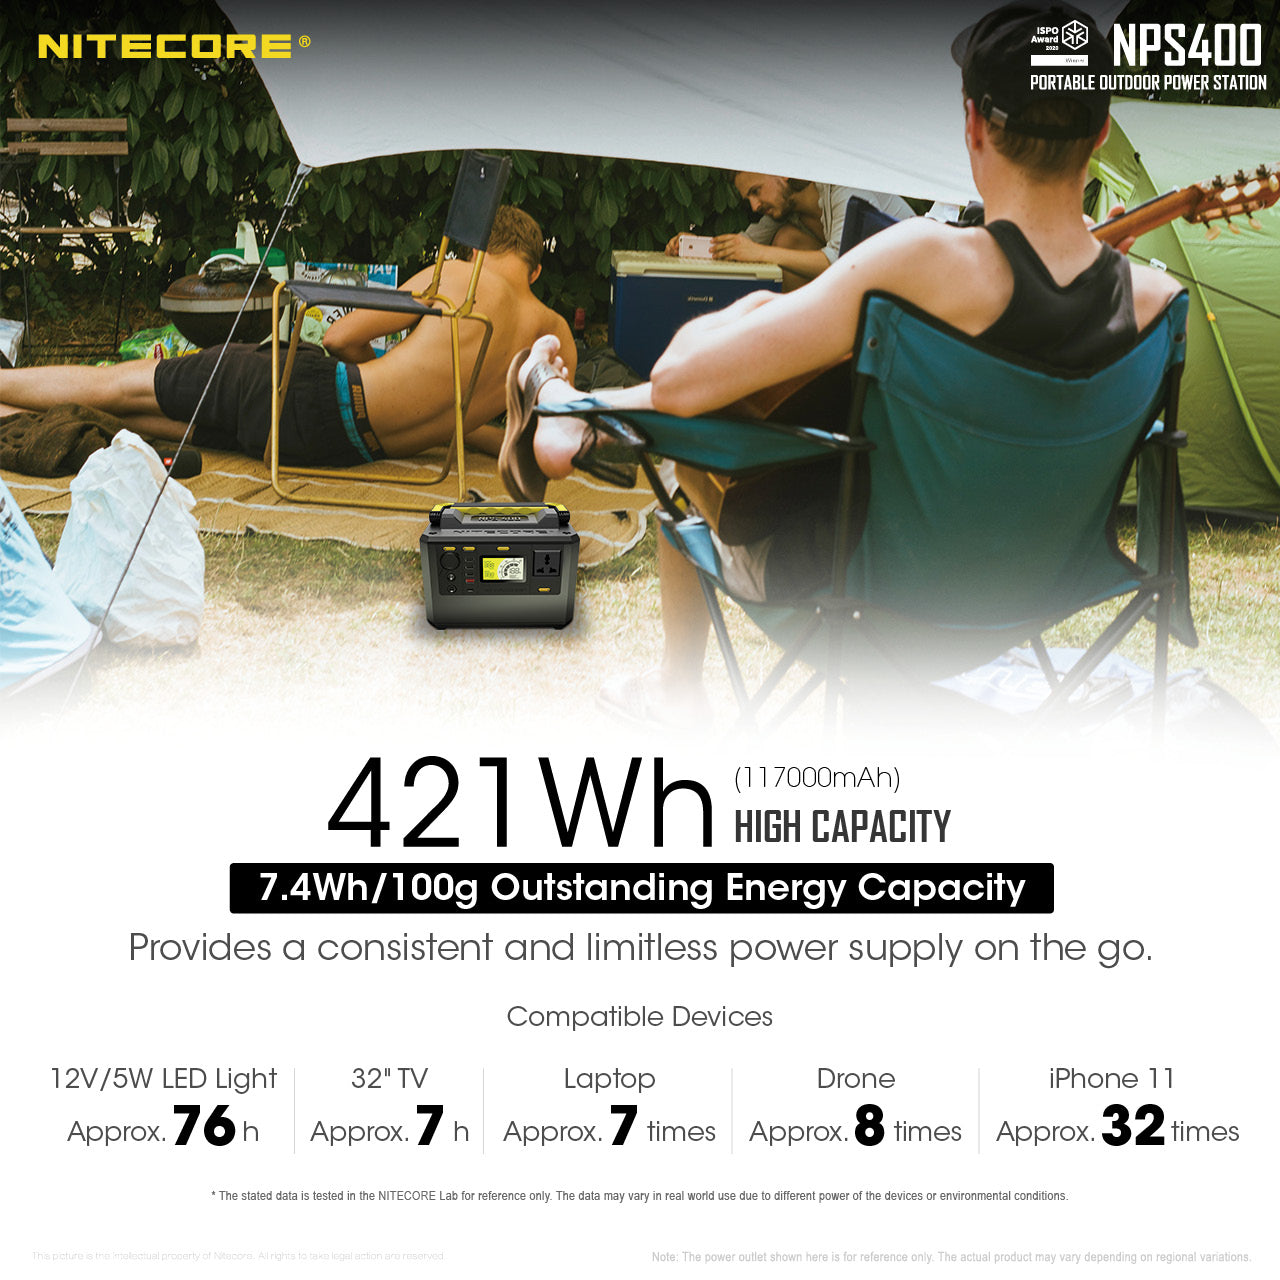 NPS400 (421Wh) Portable Power Station